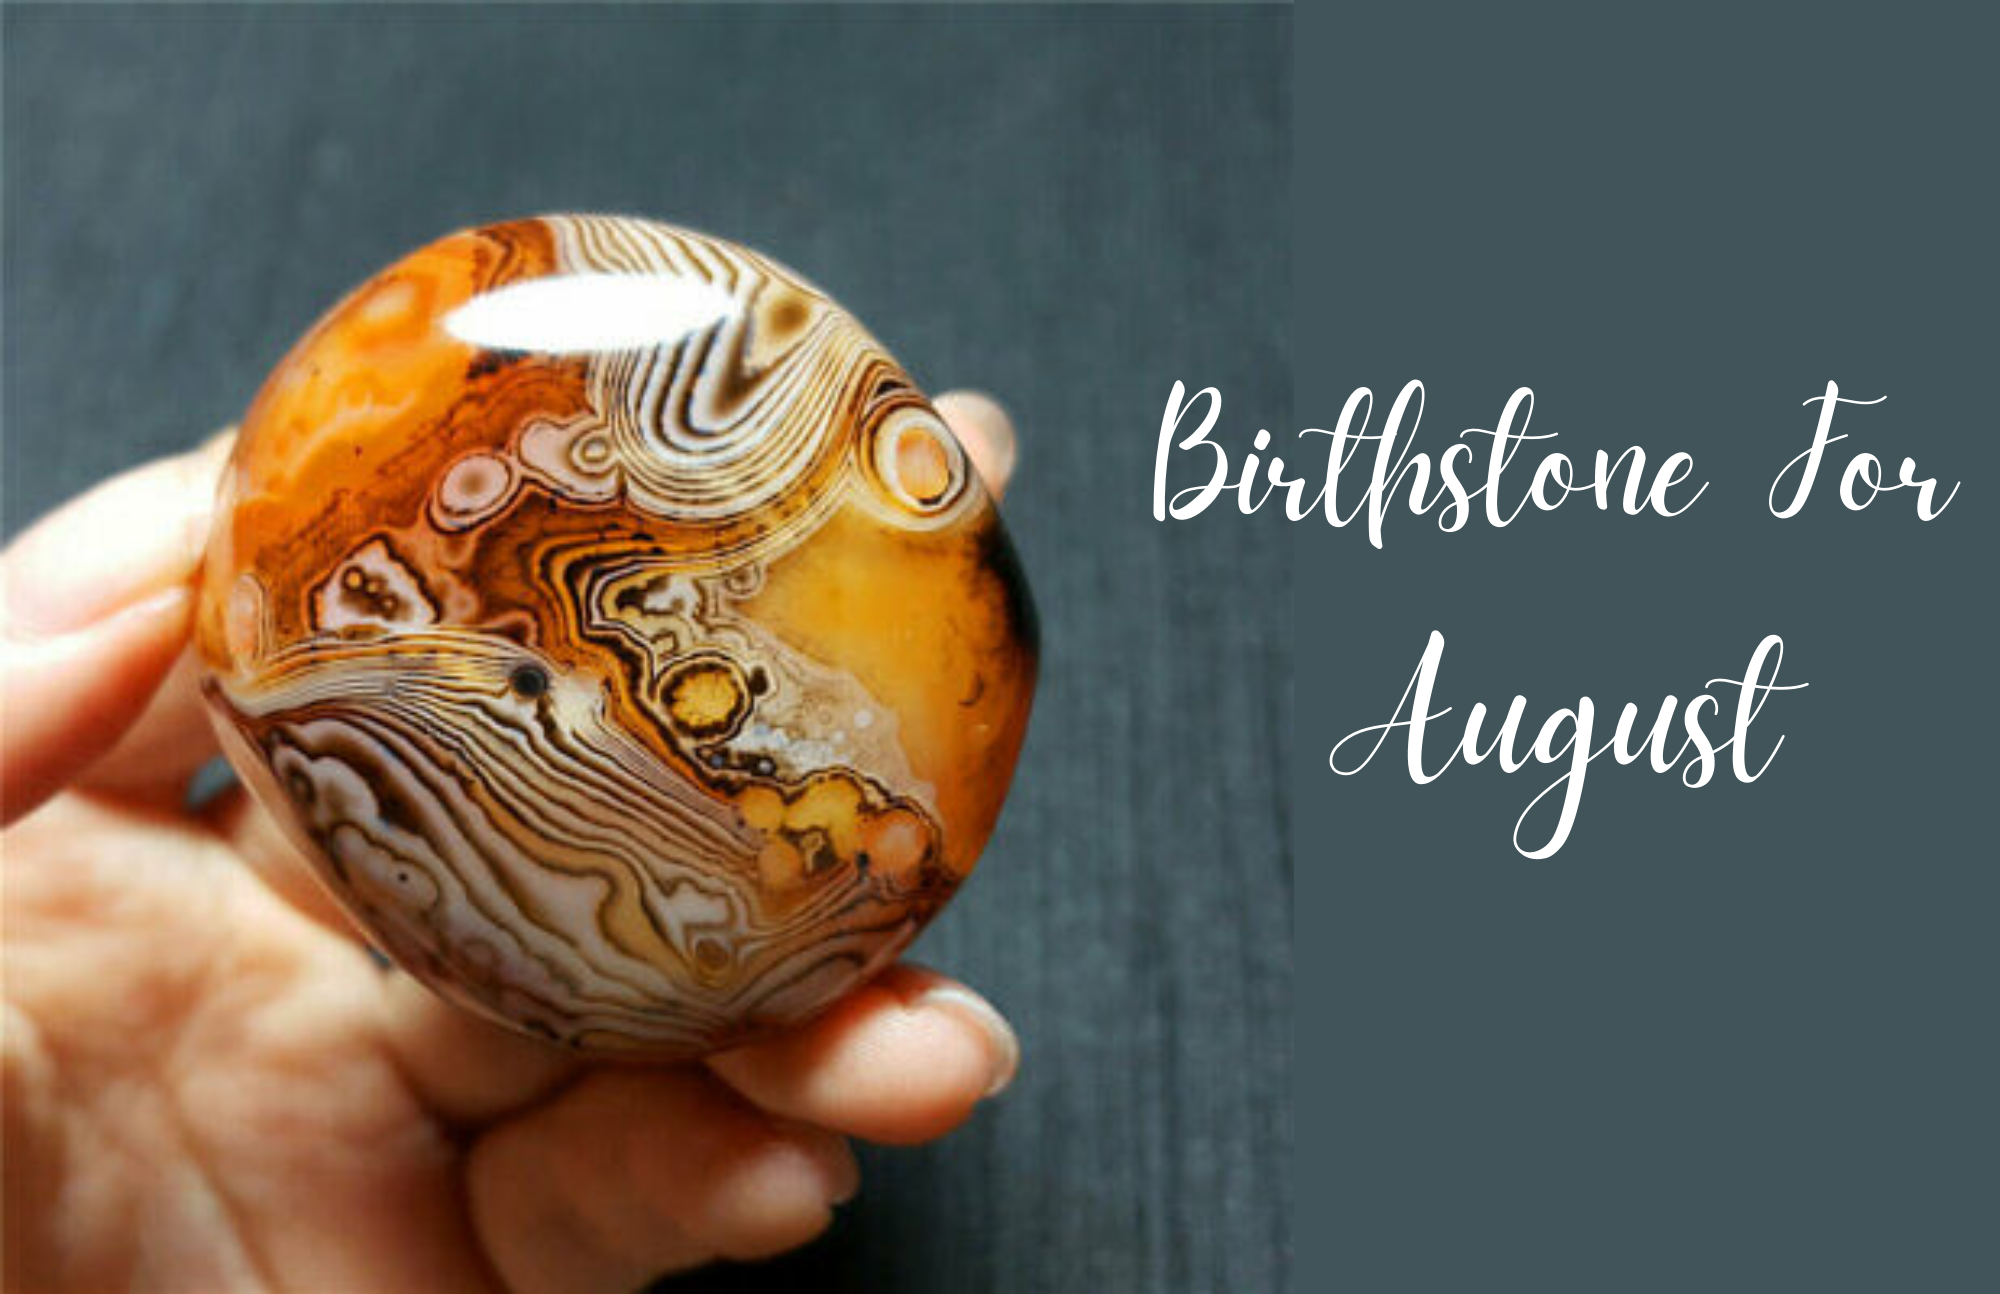 Birthstone For August - The Sardonyx Stone, Which Rose To Fame Early In This Generation